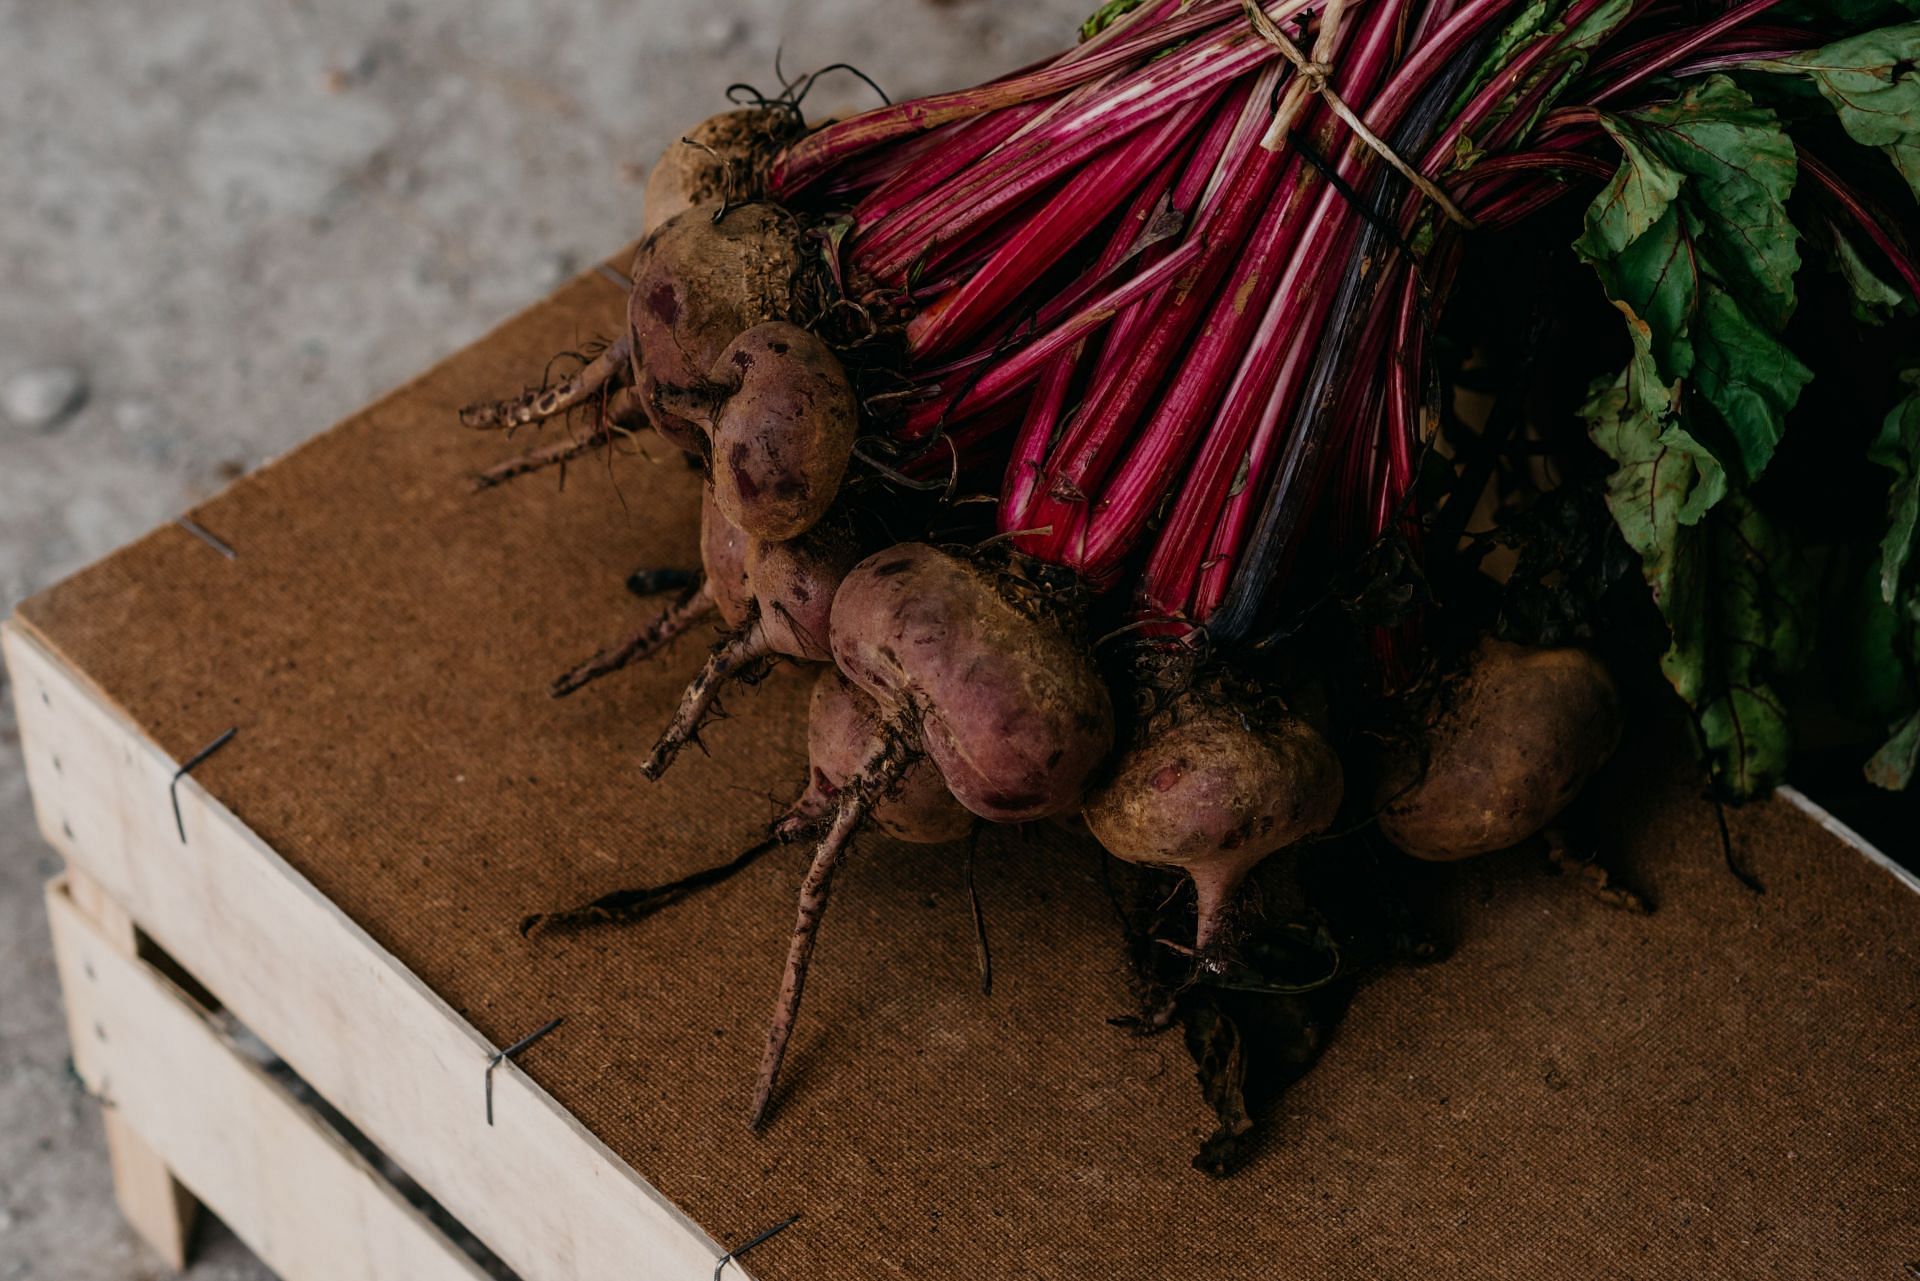 Beetroot fights inflammation, aids digestion, and promotes healthy skin (Image via Pexels)